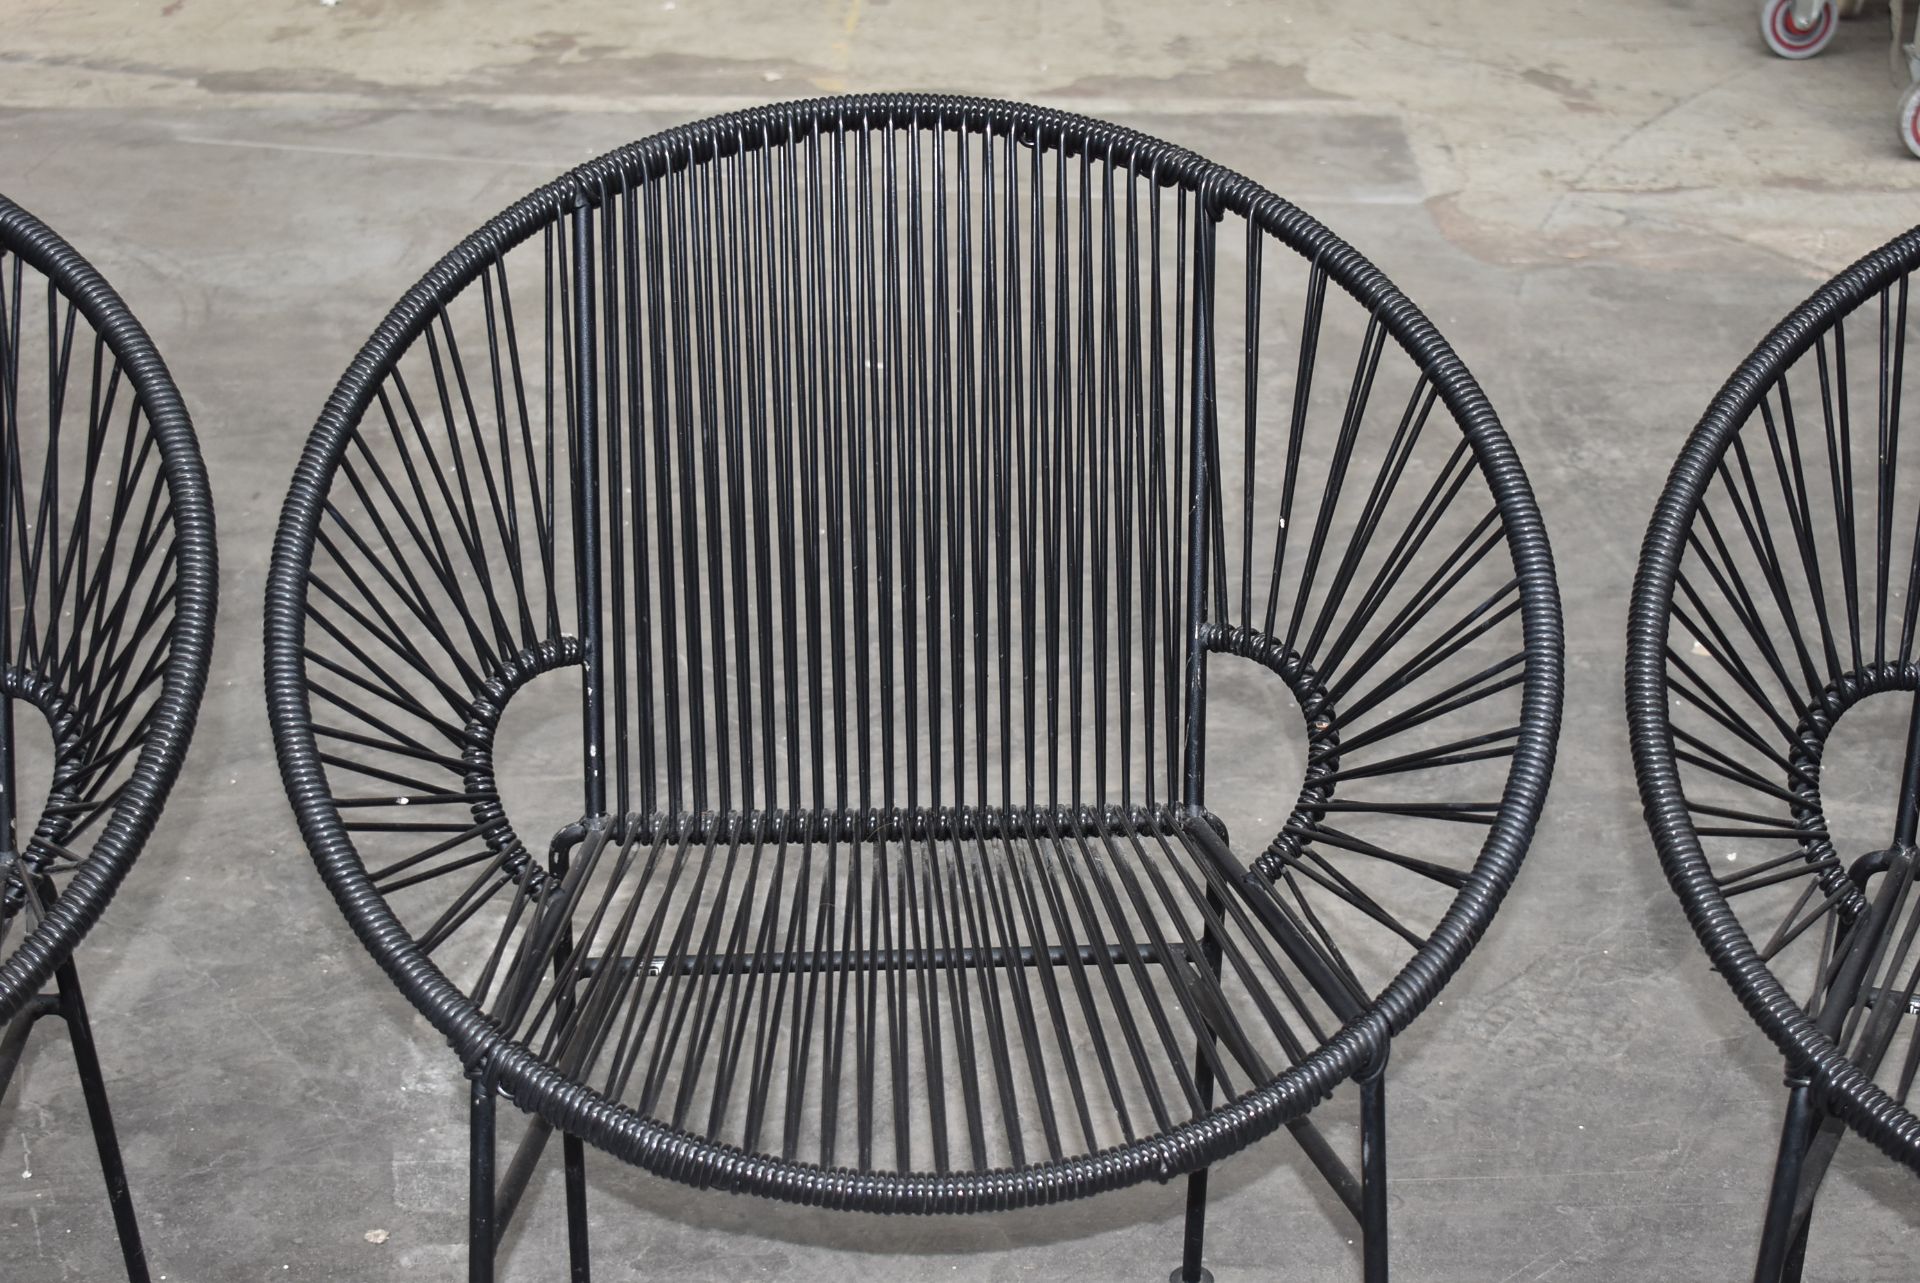 4 x Innit Designer Chairs - Acapulco Style Chairs in Black Suitable For Indoor or Outdoor Use - - Image 7 of 9